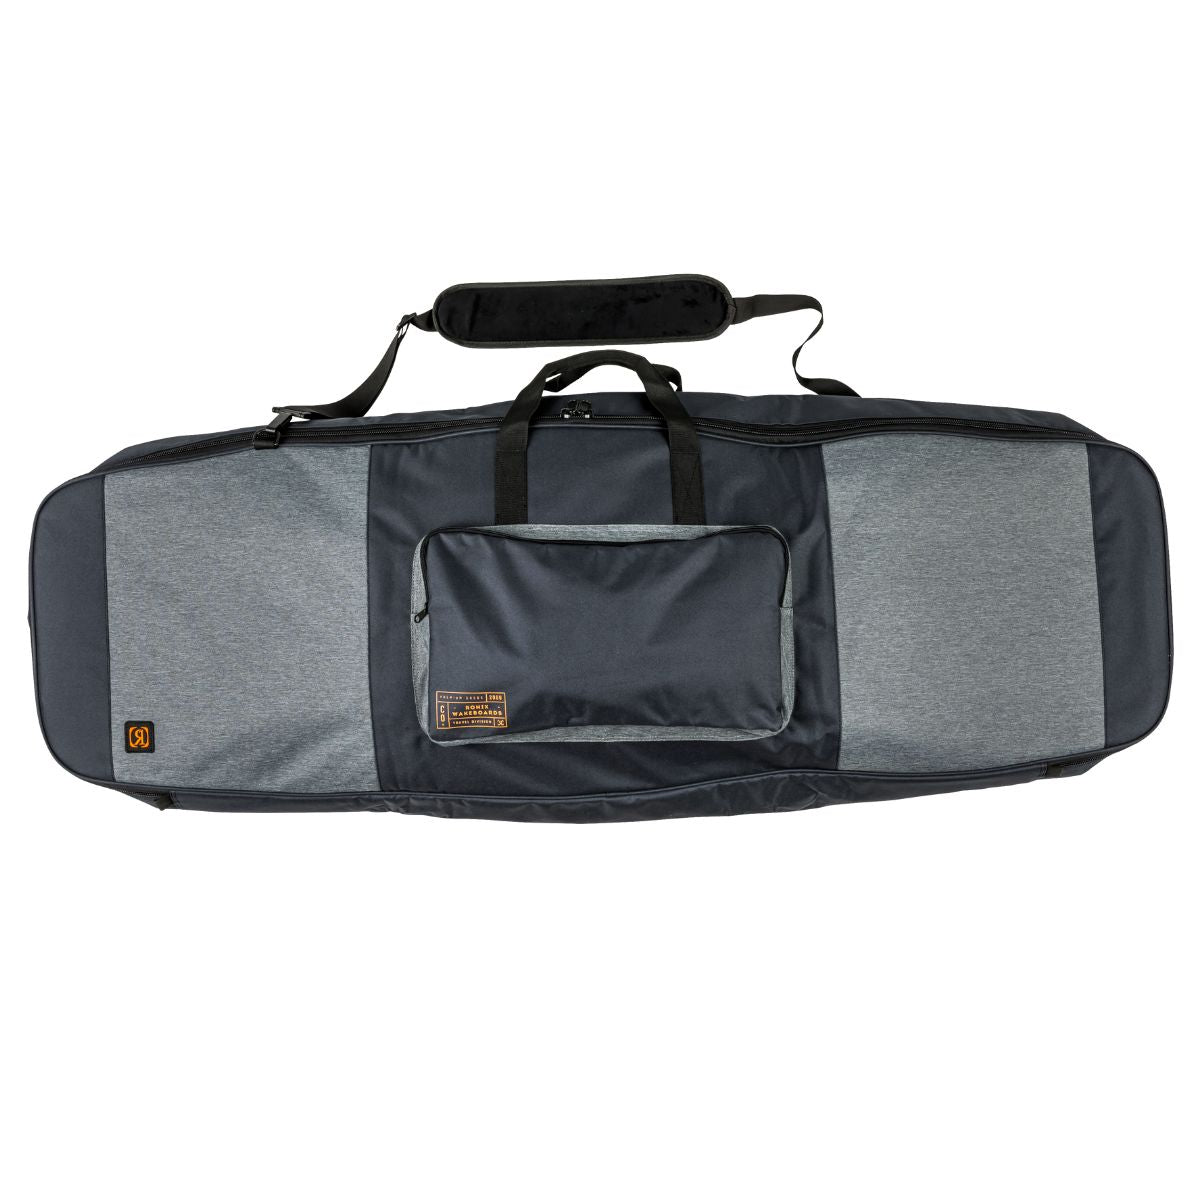 Ronix Squadron Half Padded Wakeboard Bag